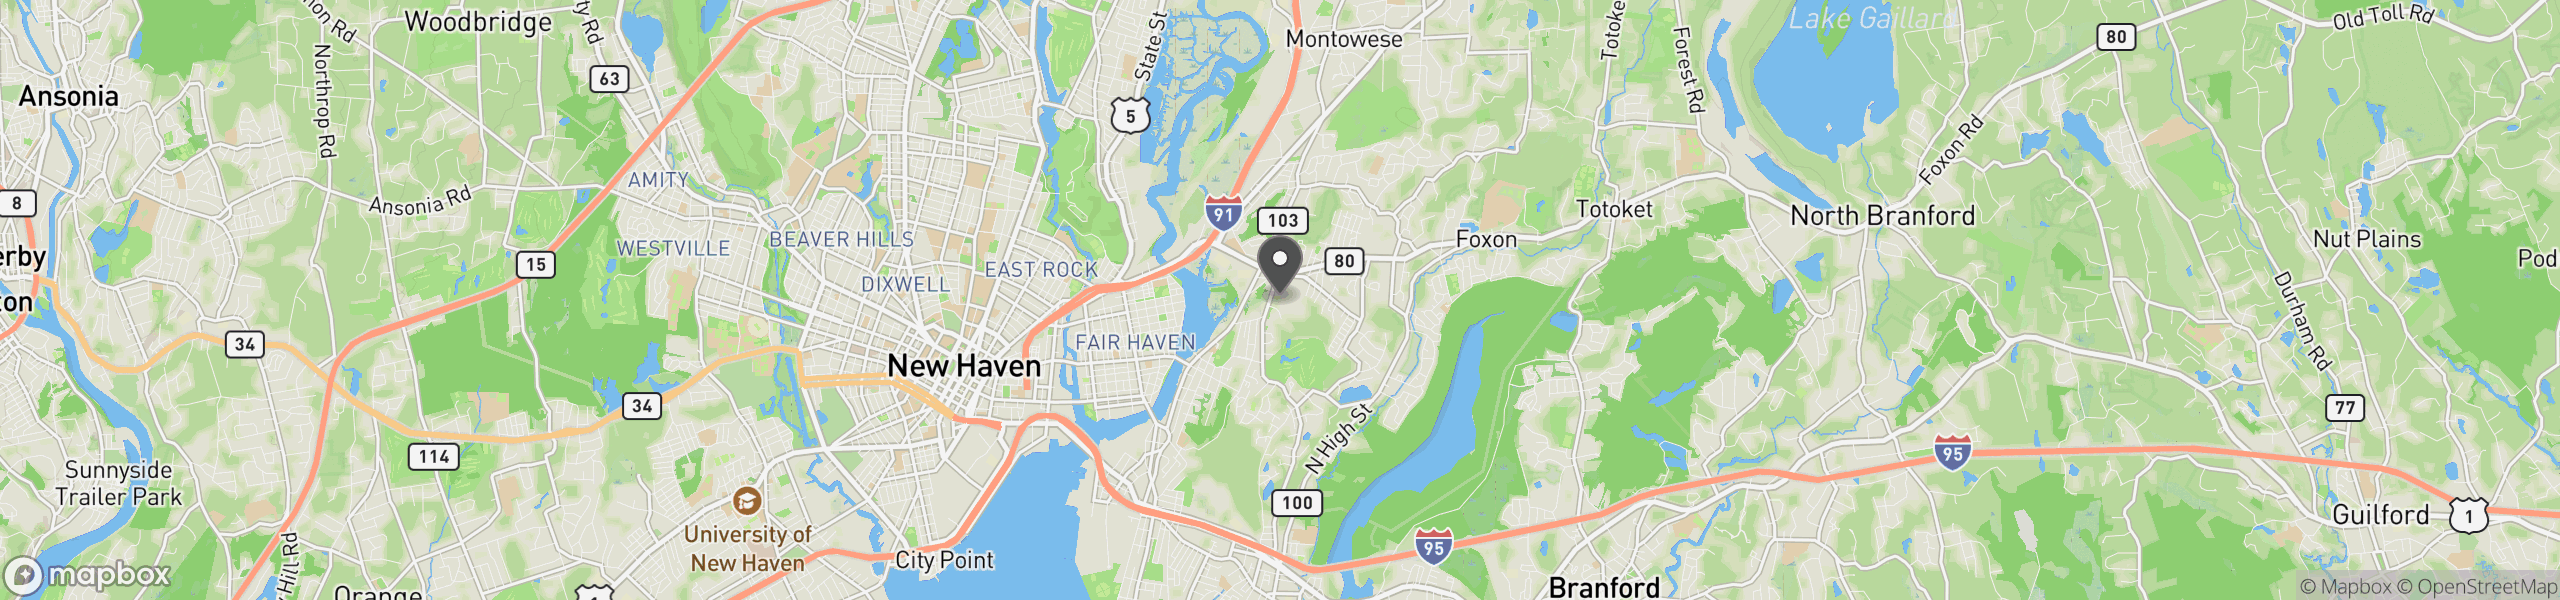 New Haven, CT 06513